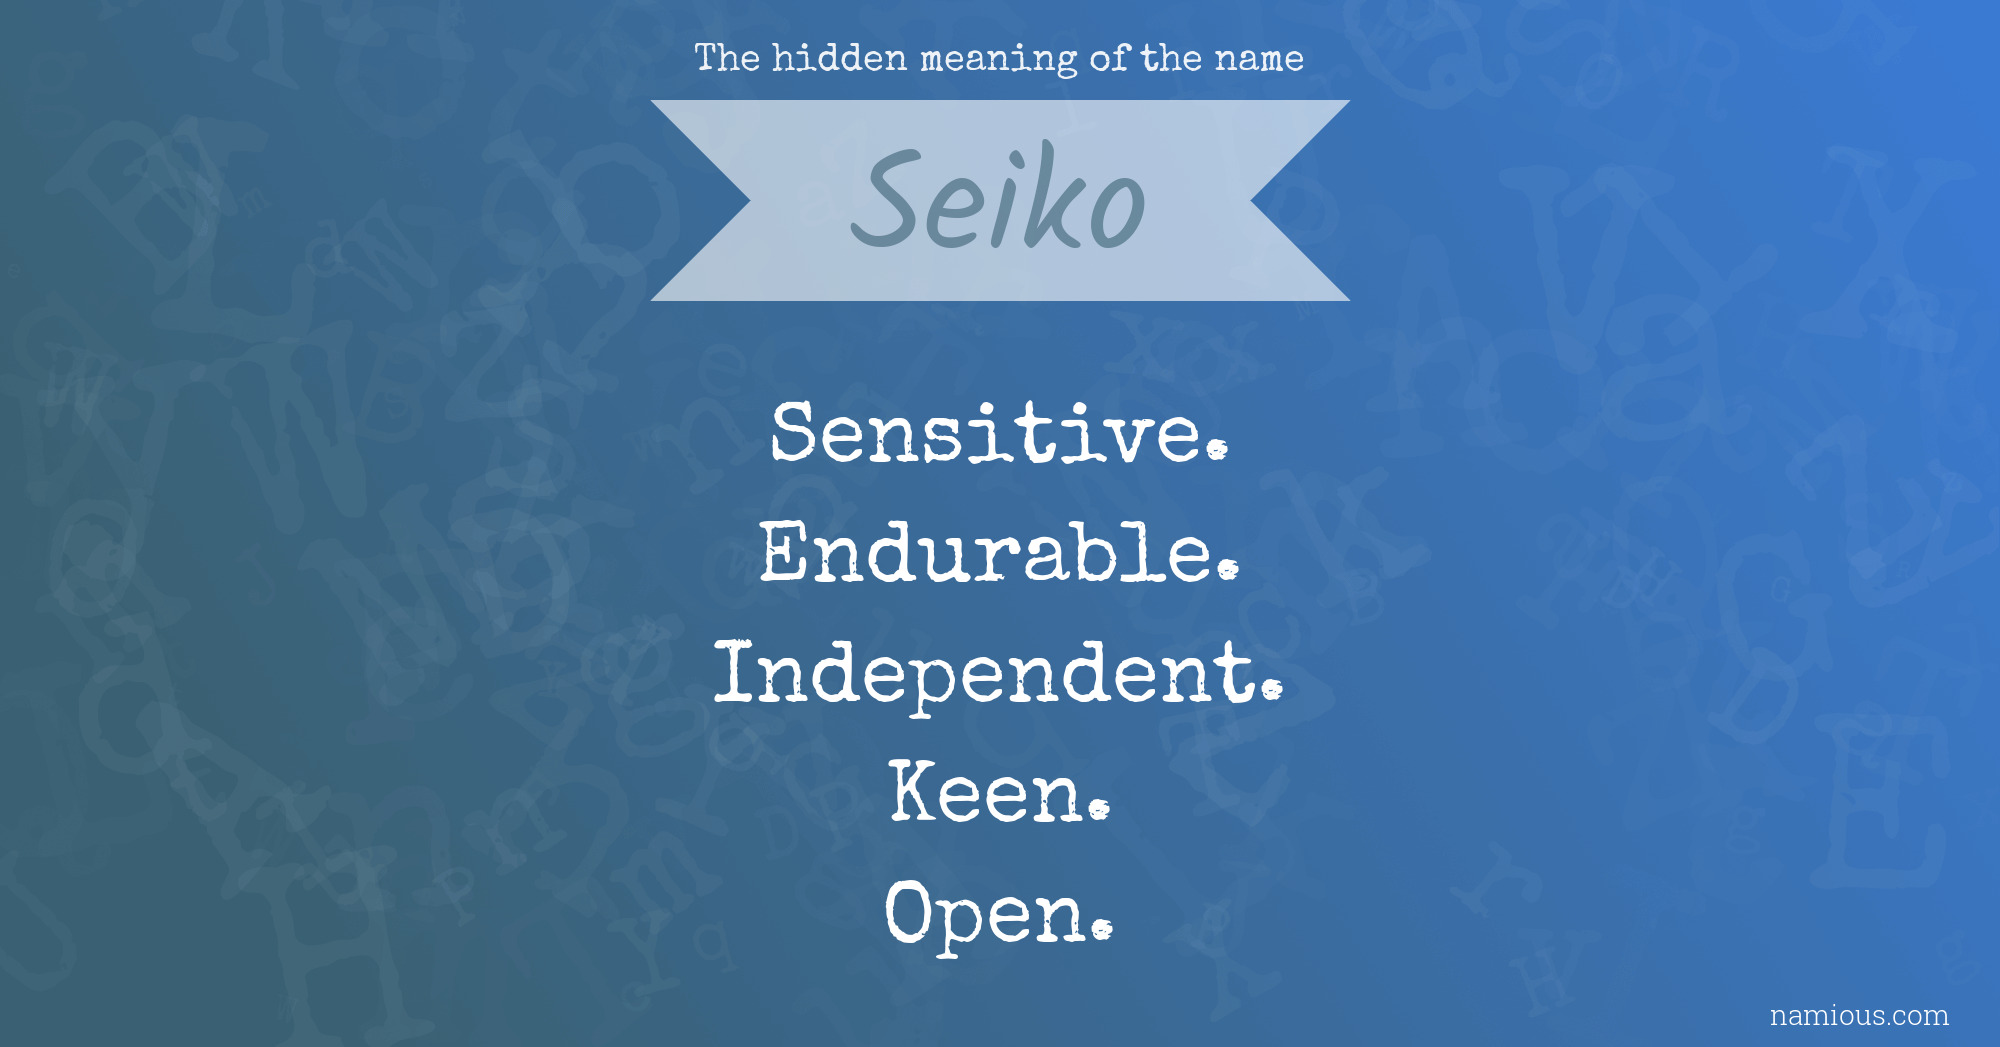 The hidden meaning of the name Seiko | Namious